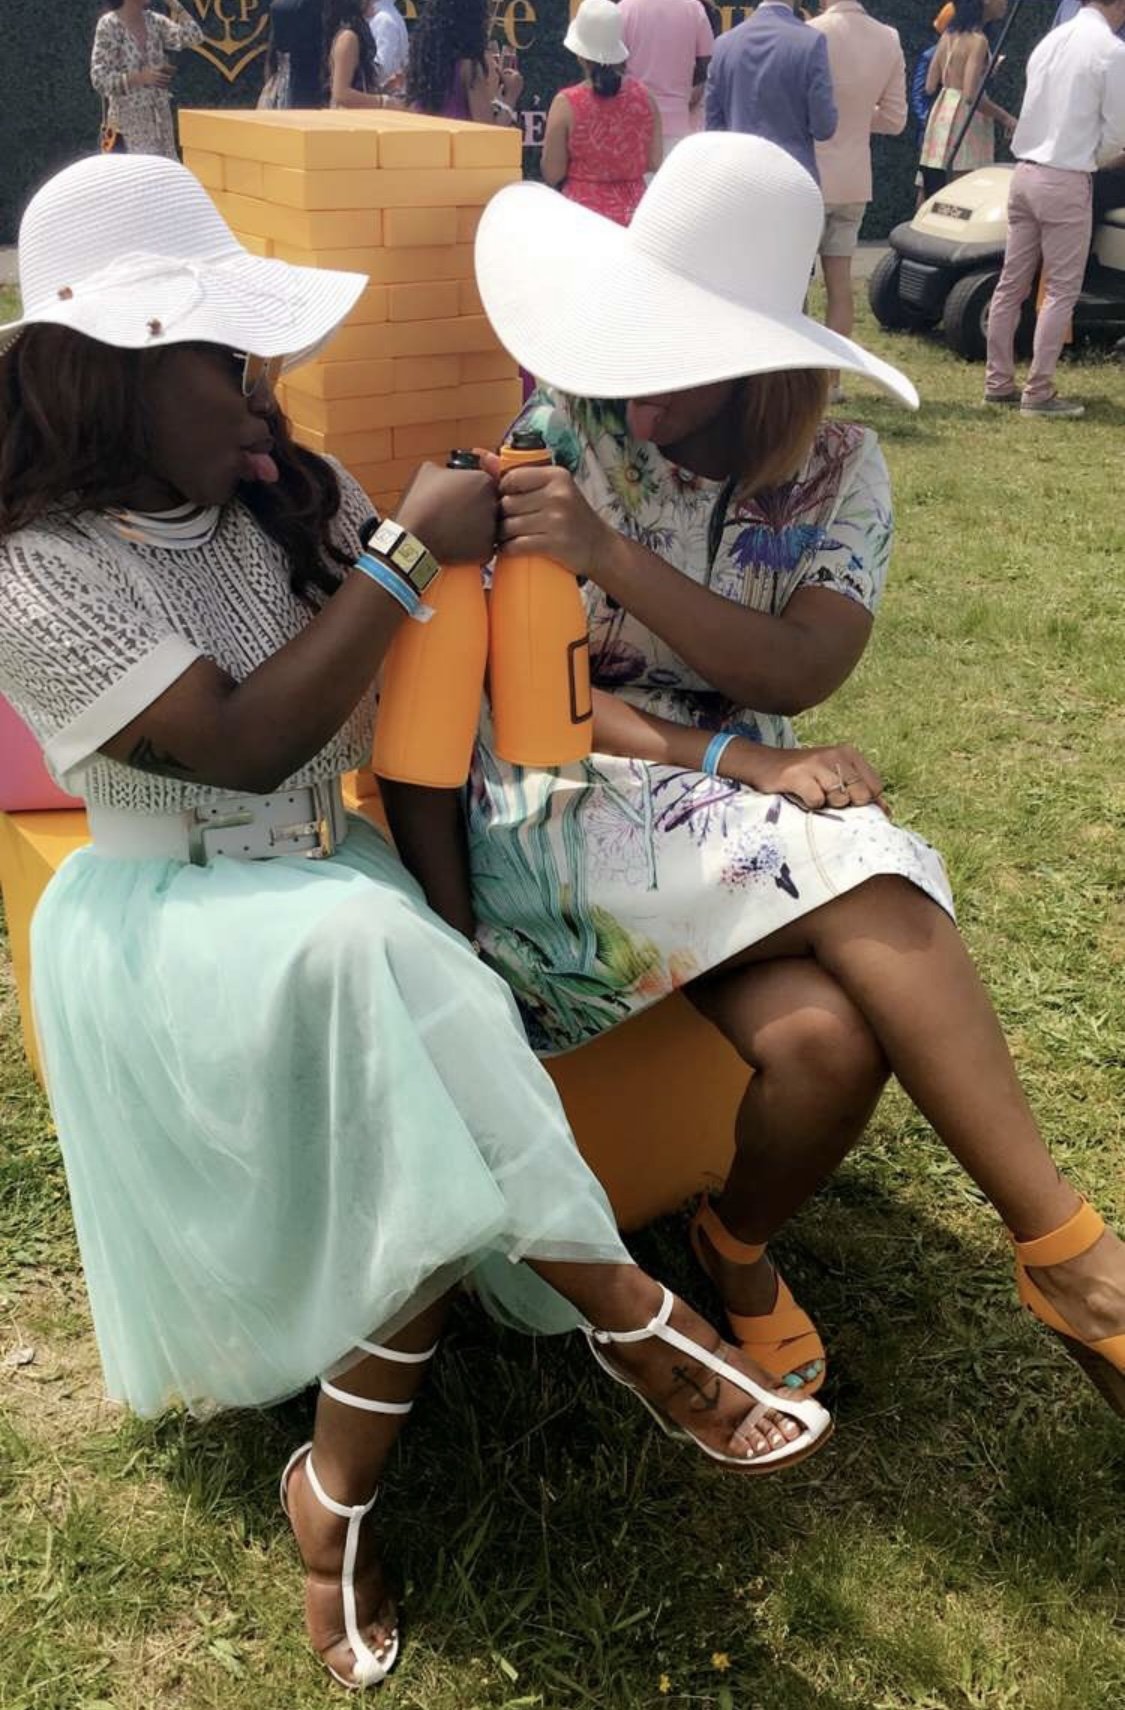 The Resource at the Veuve Clicquot Polo Classic — The Resource